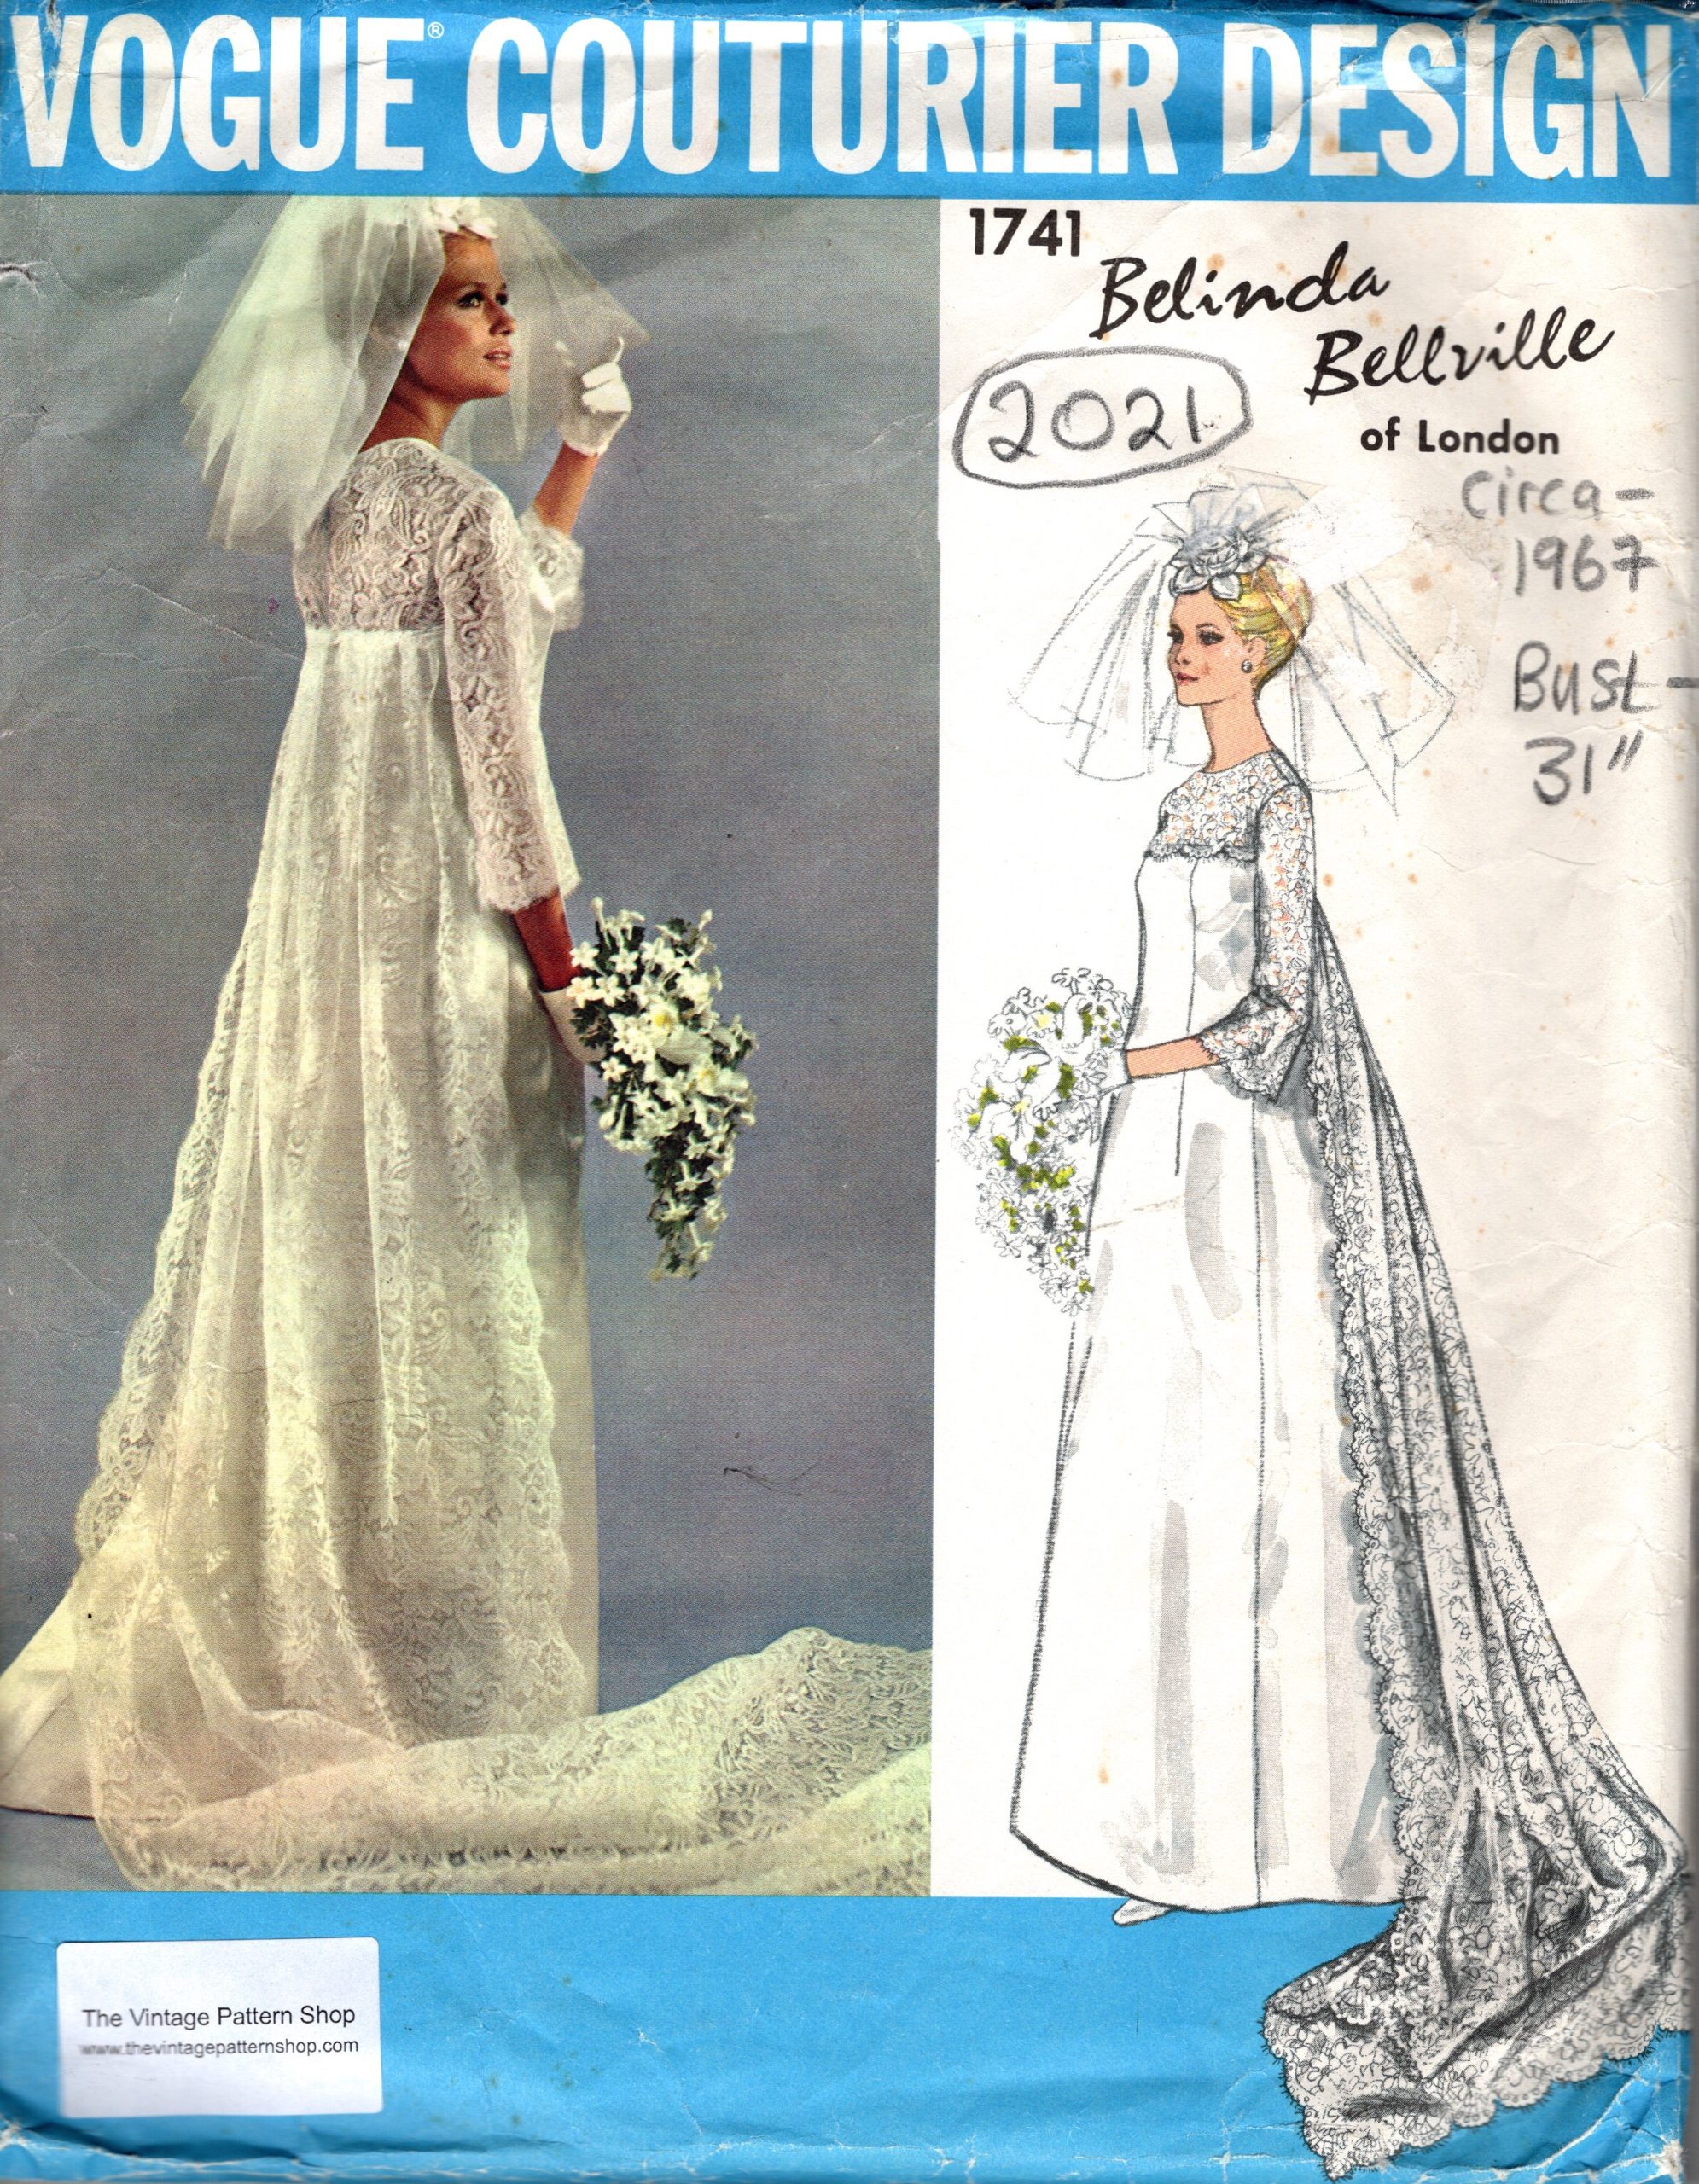 1960s BEAUTIFUL Ronald Paterson Wedding Gown Bridal Dress Pattern Vogue  Couturier Design 1156 Vintage Sewing Pattern Strapless Gown,Petticoat and  Short Jacket Bust 32